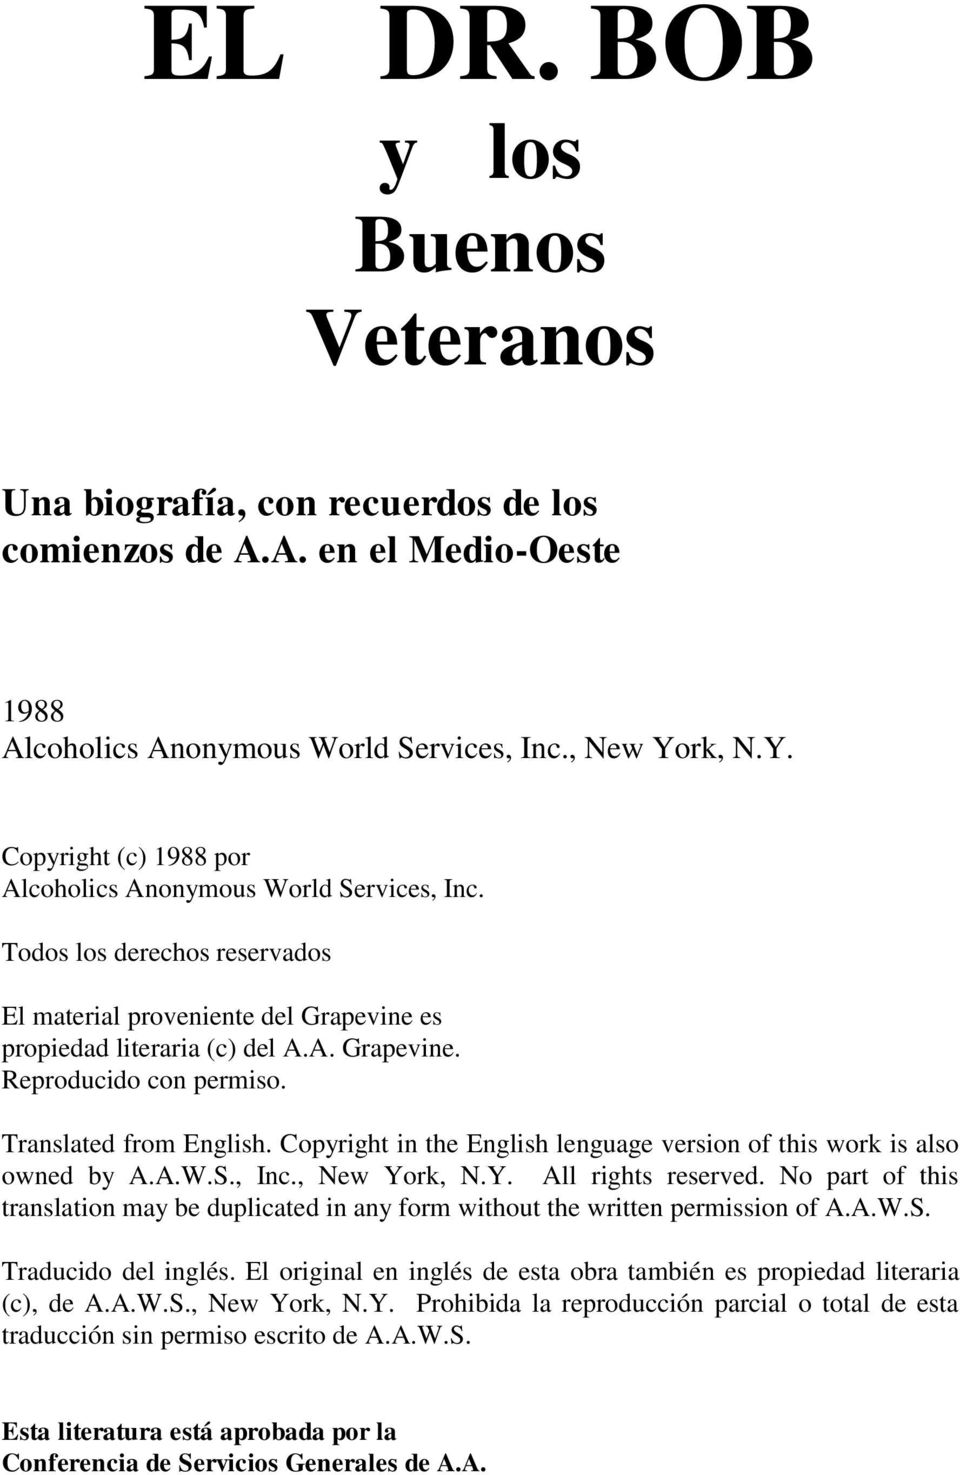 Translated from English. Copyright in the English lenguage version of this work is also owned by A.A.W.S., Inc., New York, N.Y. All rights reserved.